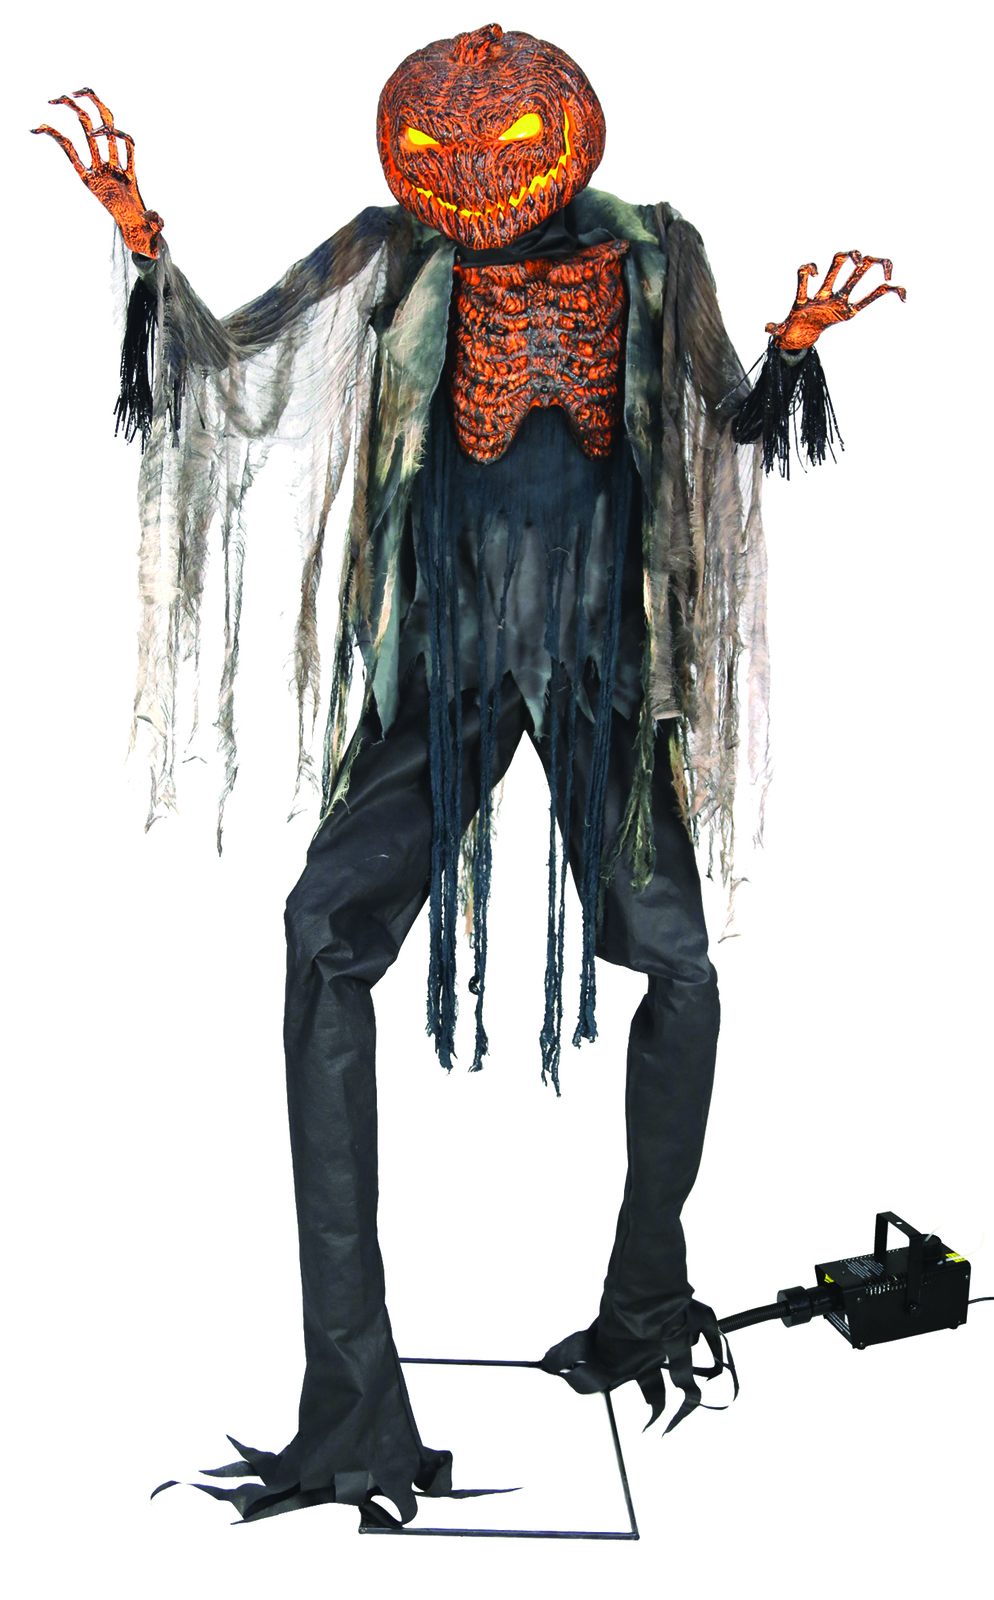 Primary image for Seasonal Visions Animated Scorched Scarecrow With Fog Machine